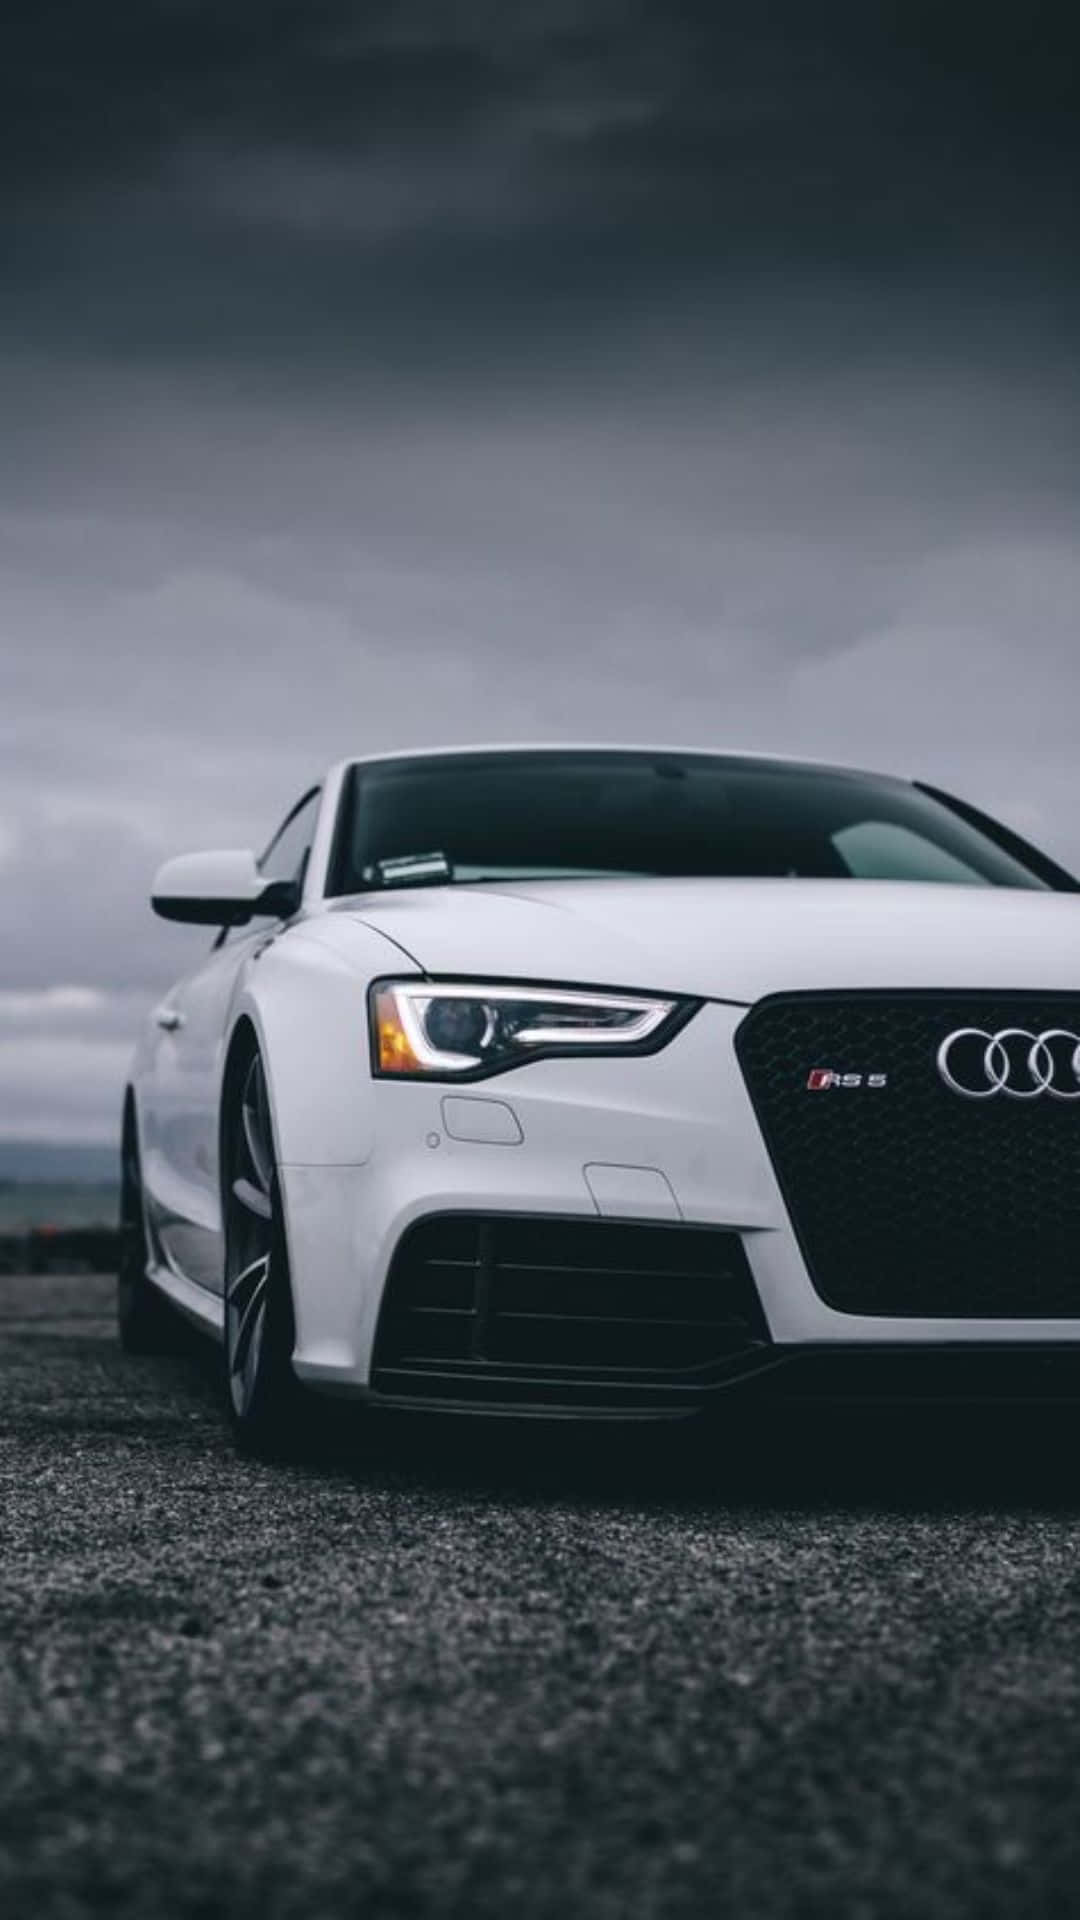 Driving in style with the Audi iPhone Wallpaper